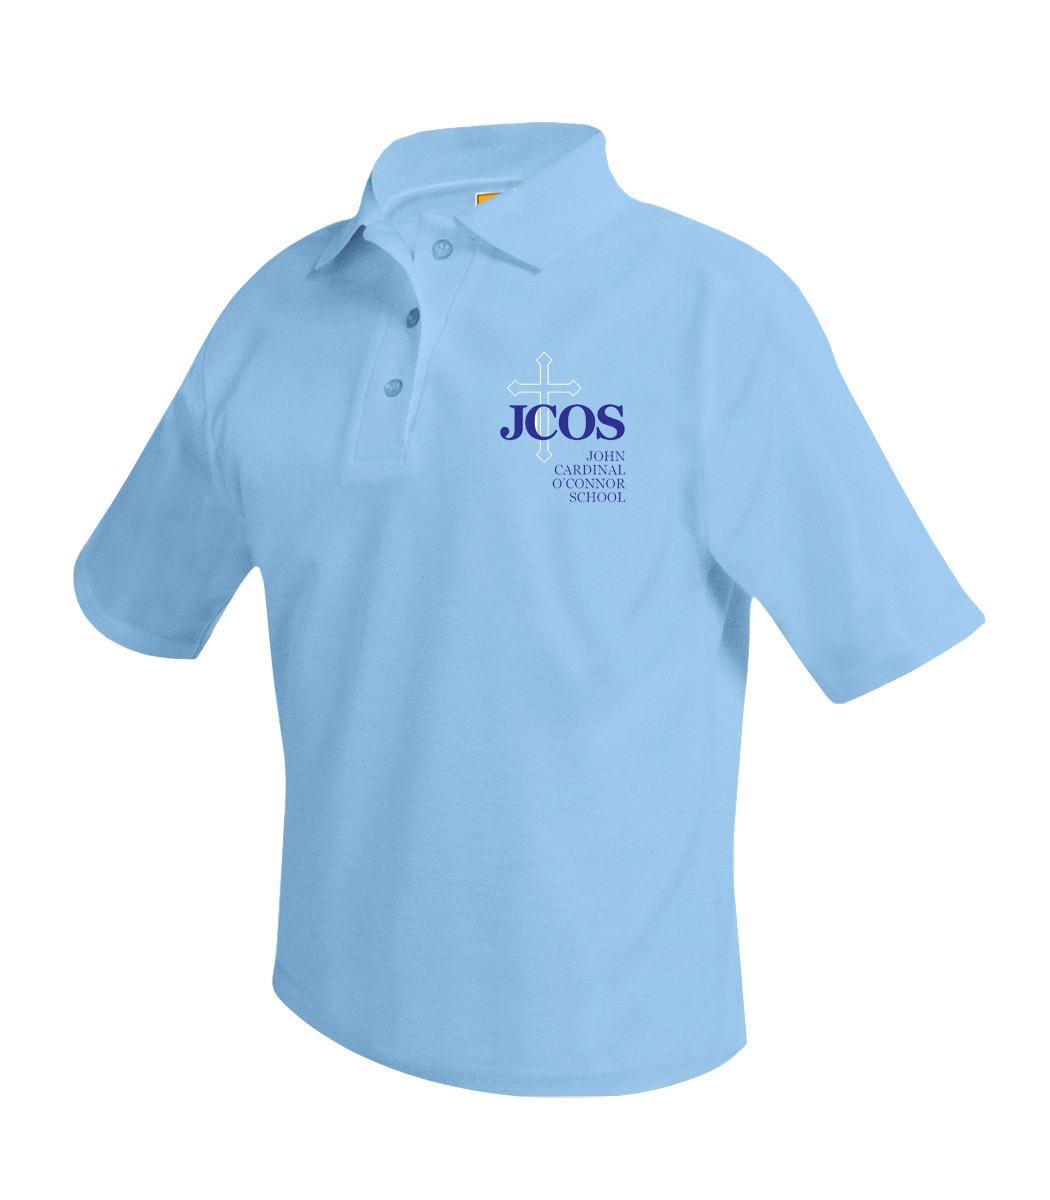 JCOS Staff S/S Polo w/ School Logo #F1- Please Allow 3-4 Weeks for Delivery